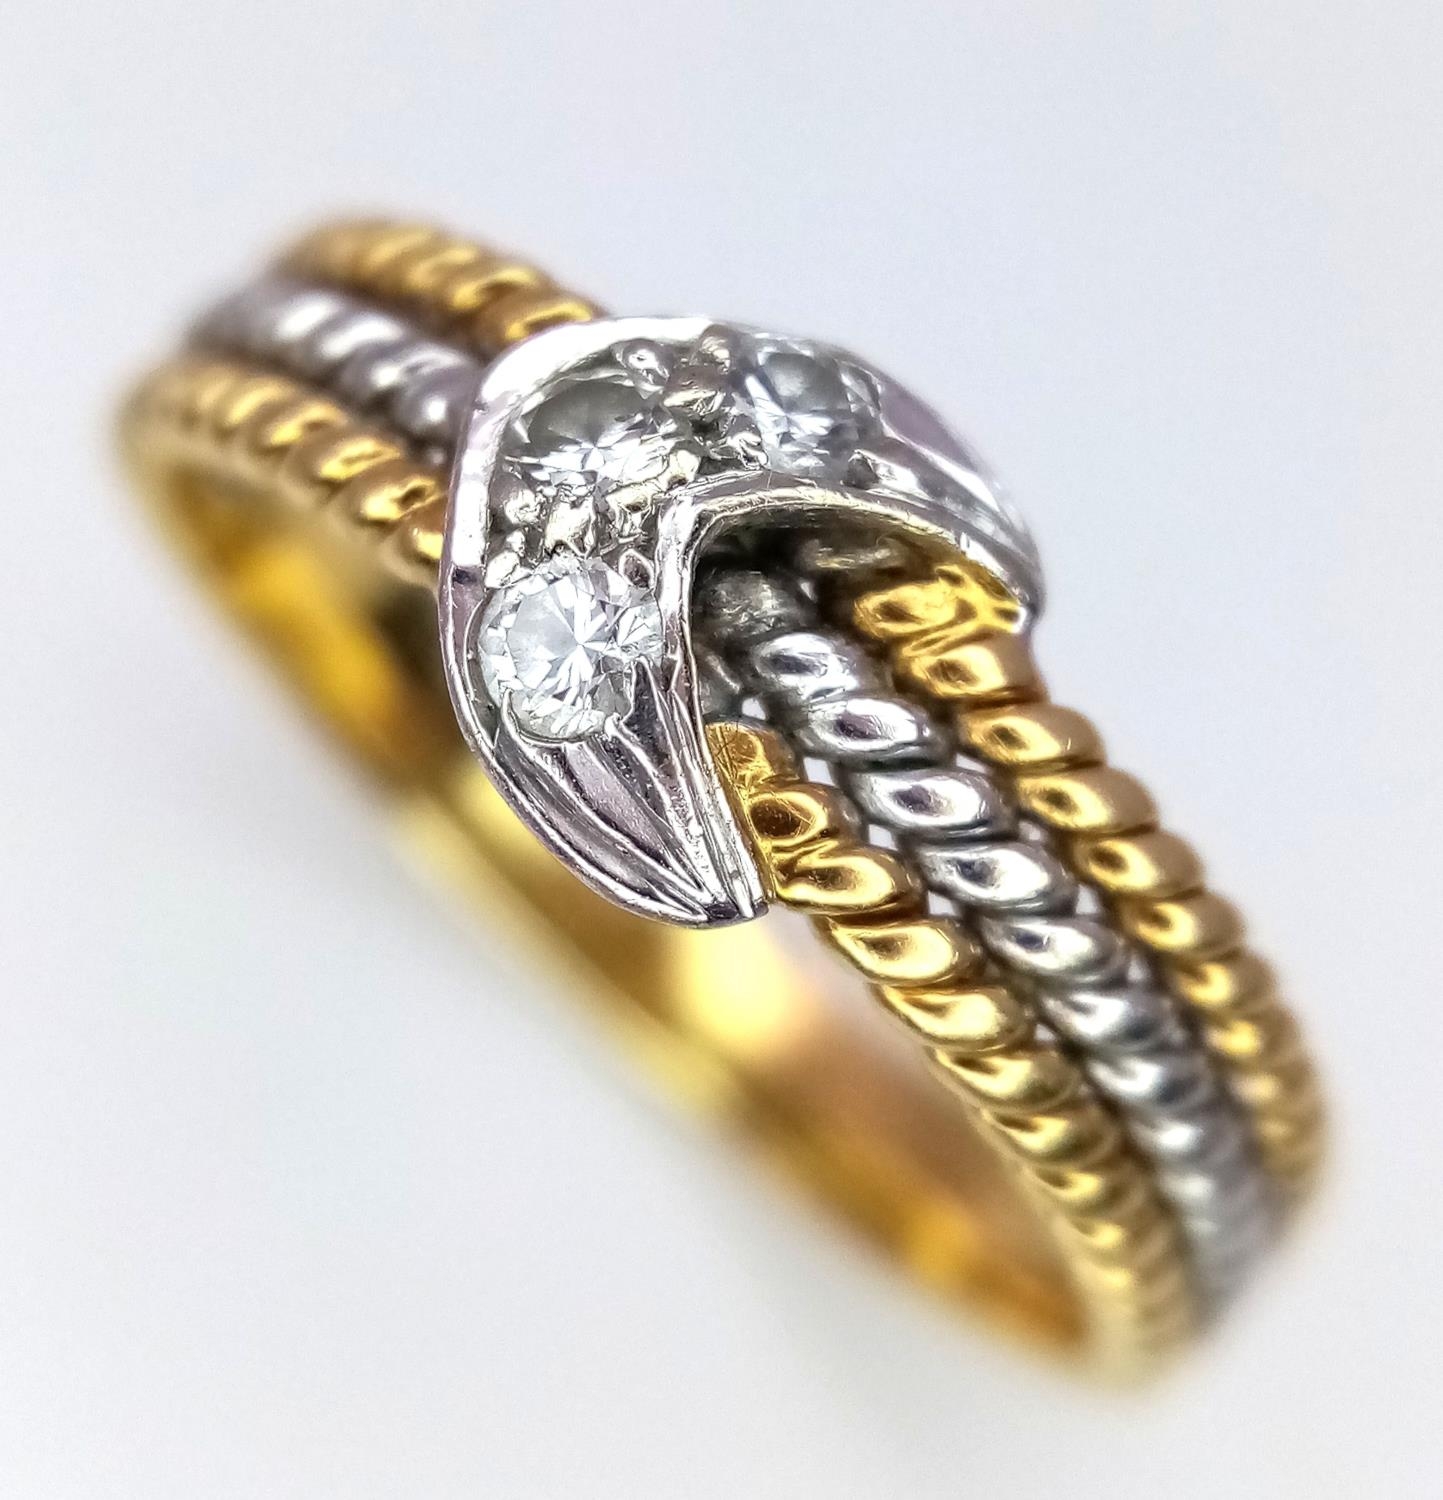 An 18K White and Yellow Gold, Diamond Crescent Ring. Size K. 2.85g total weight.